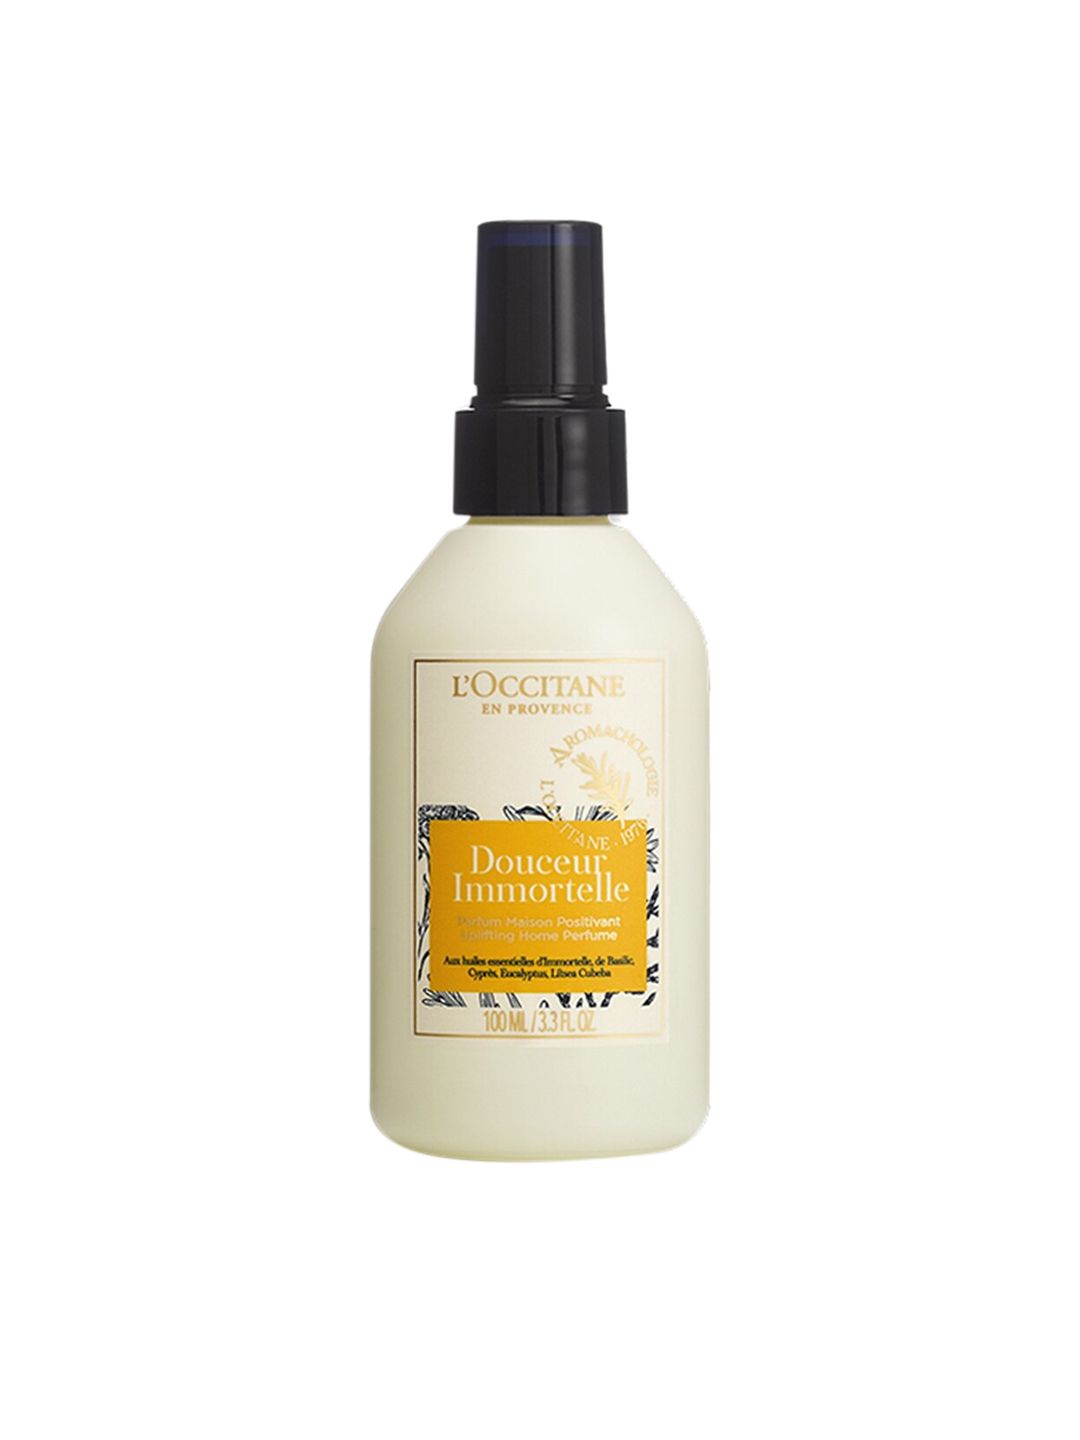 LOccitane en Provence Douceur Immortelle Uplifting Home Perfume - 100ml Price in India